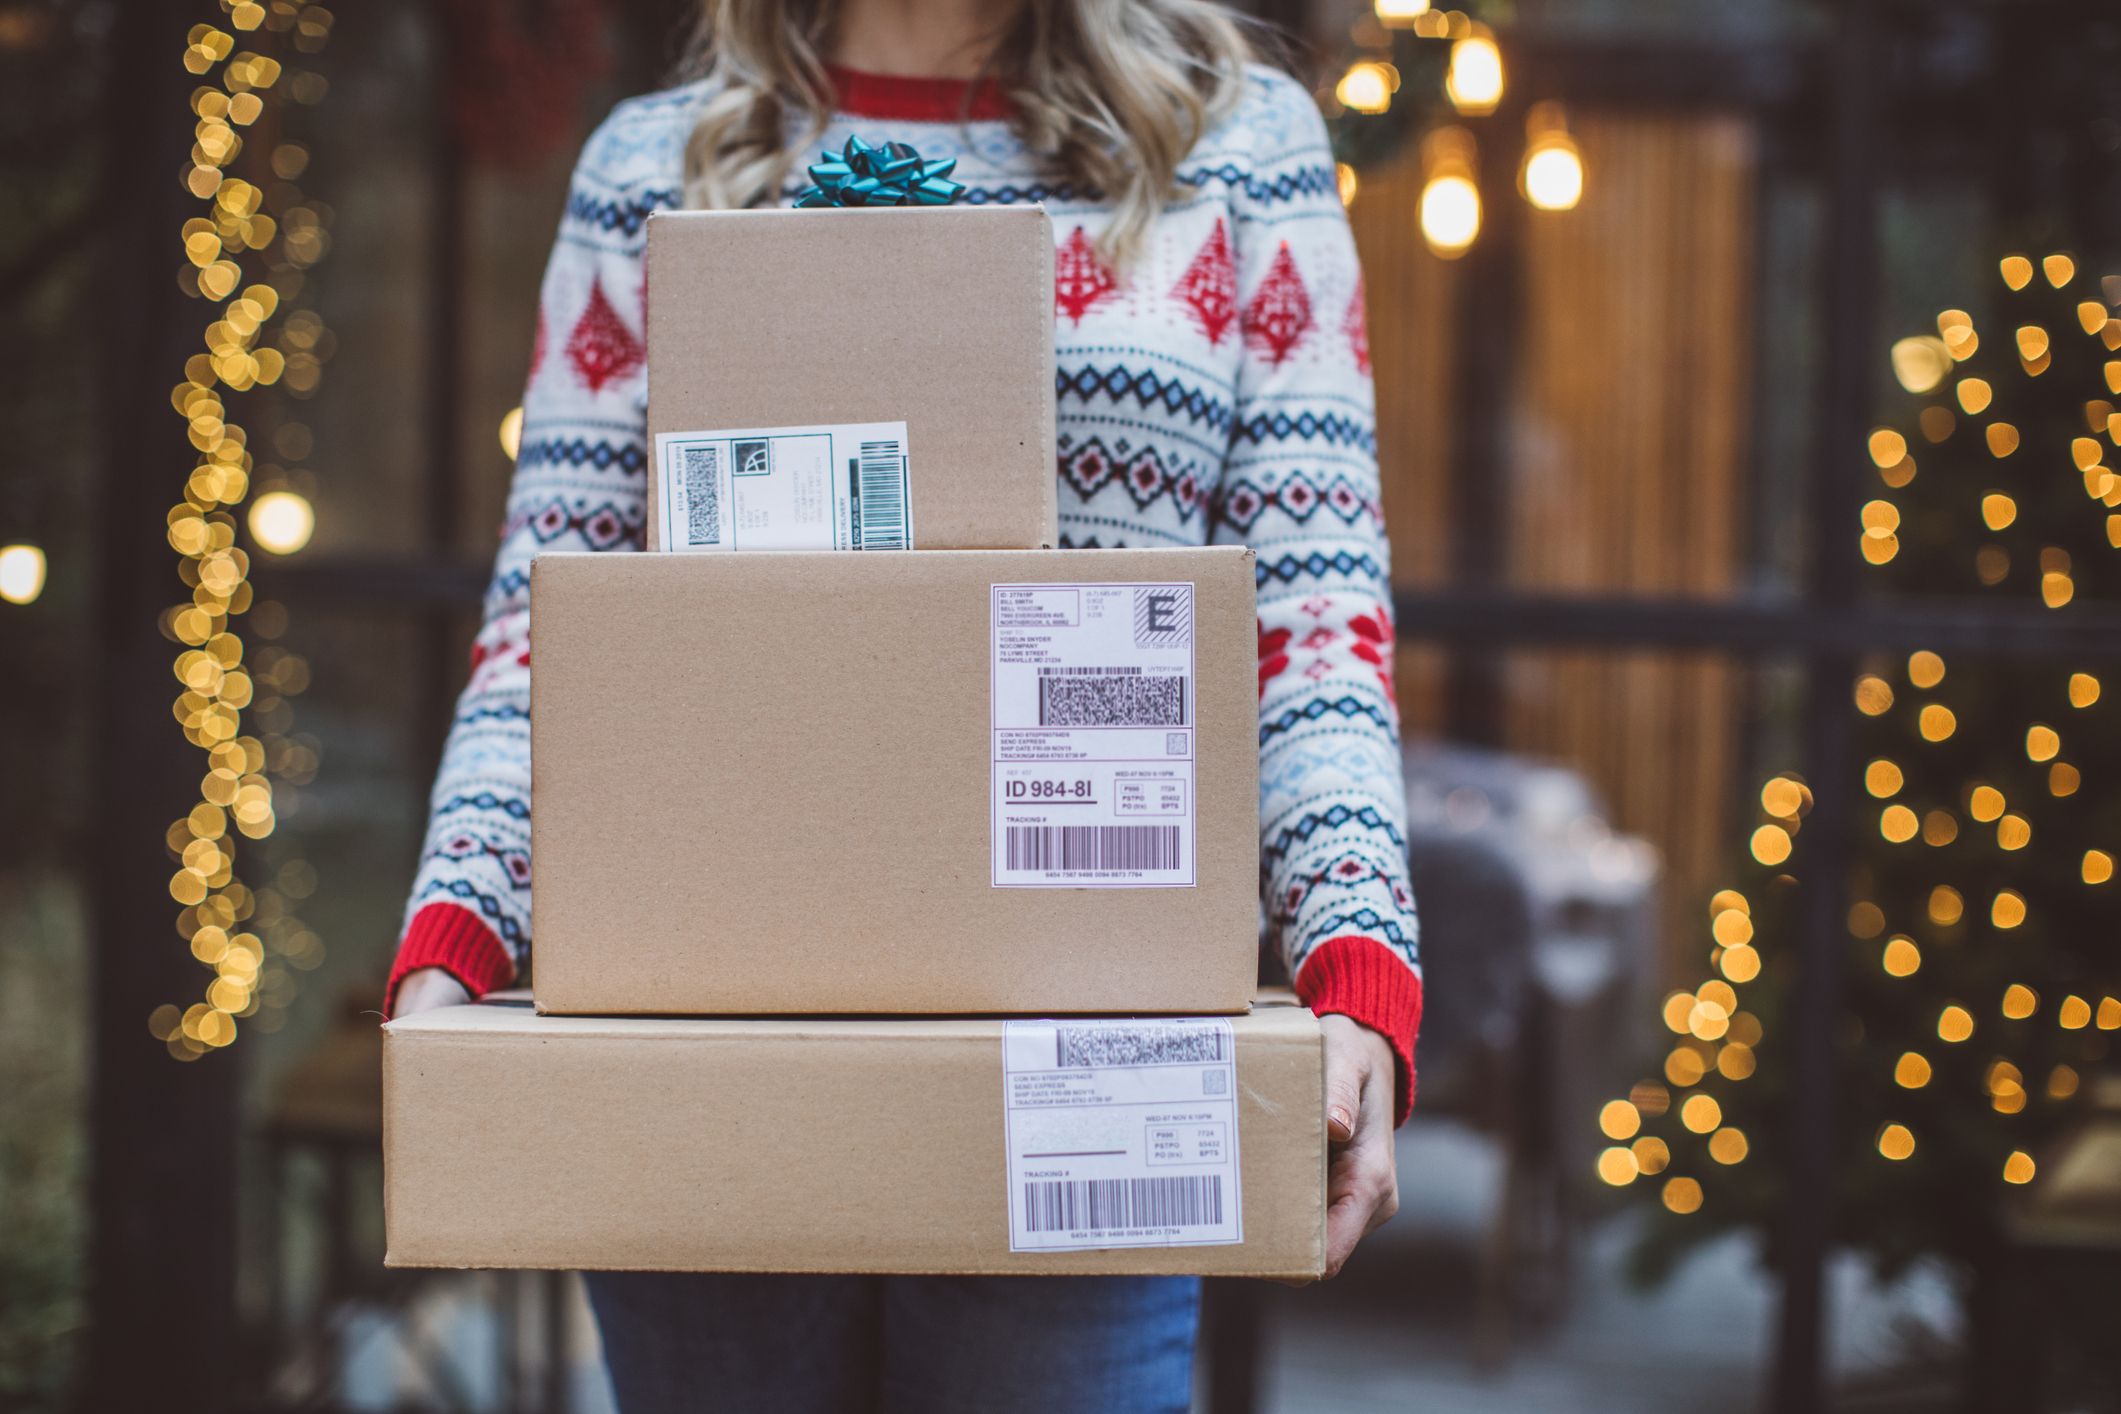 Prime members now get free same-day shipping for holiday gifts